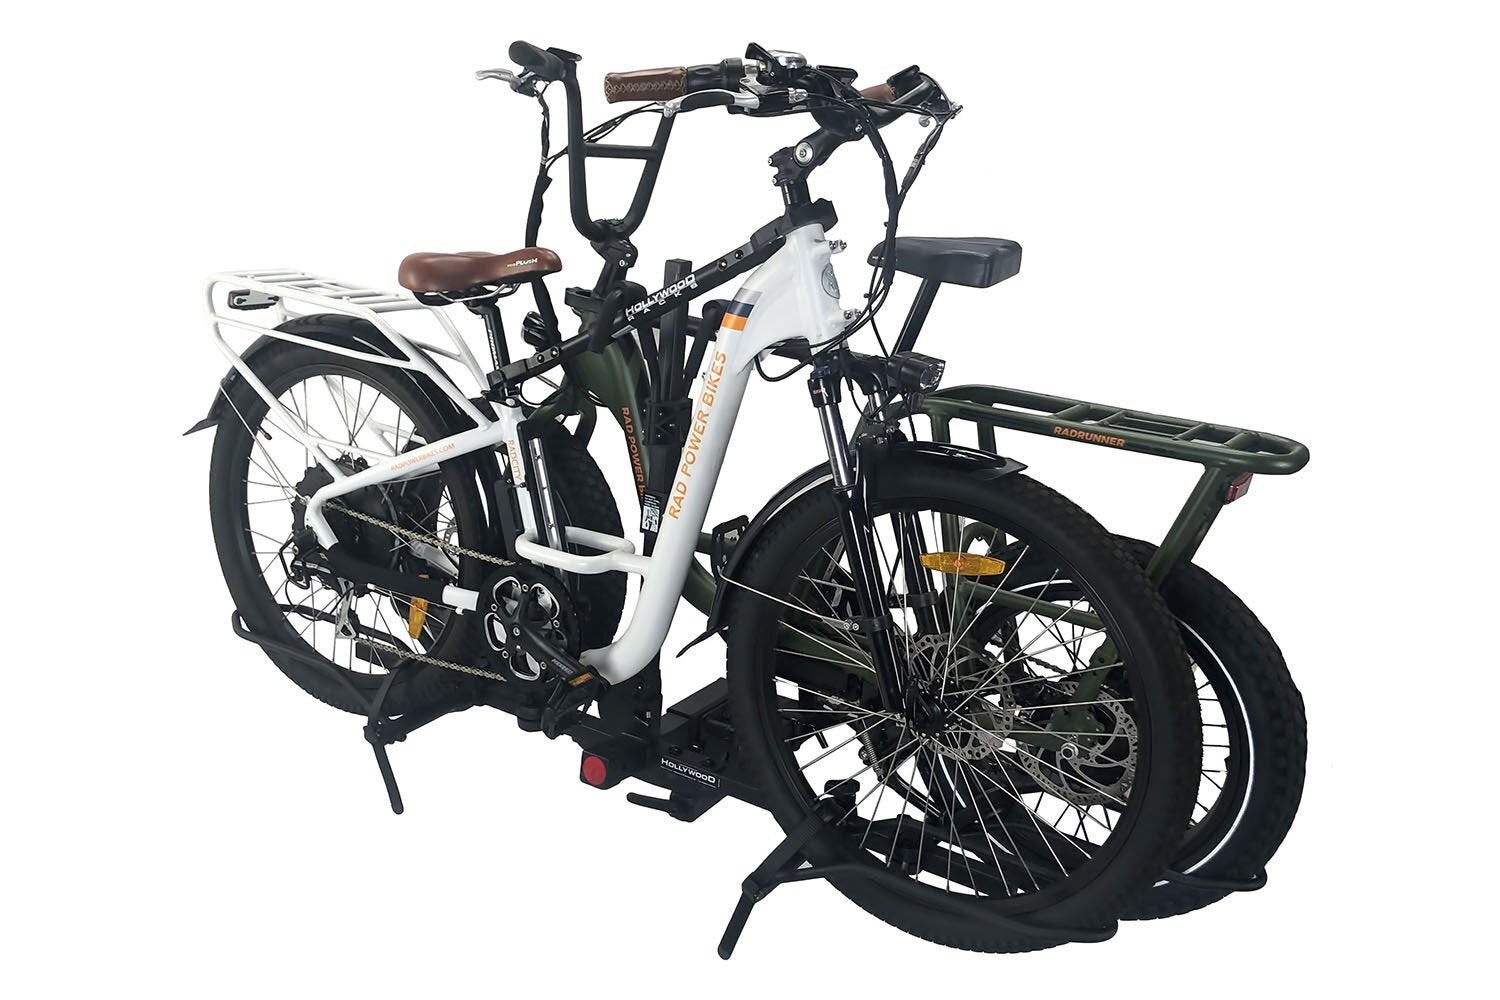 A RadRunner and RadMini attached to a Hollywood ebike rack.